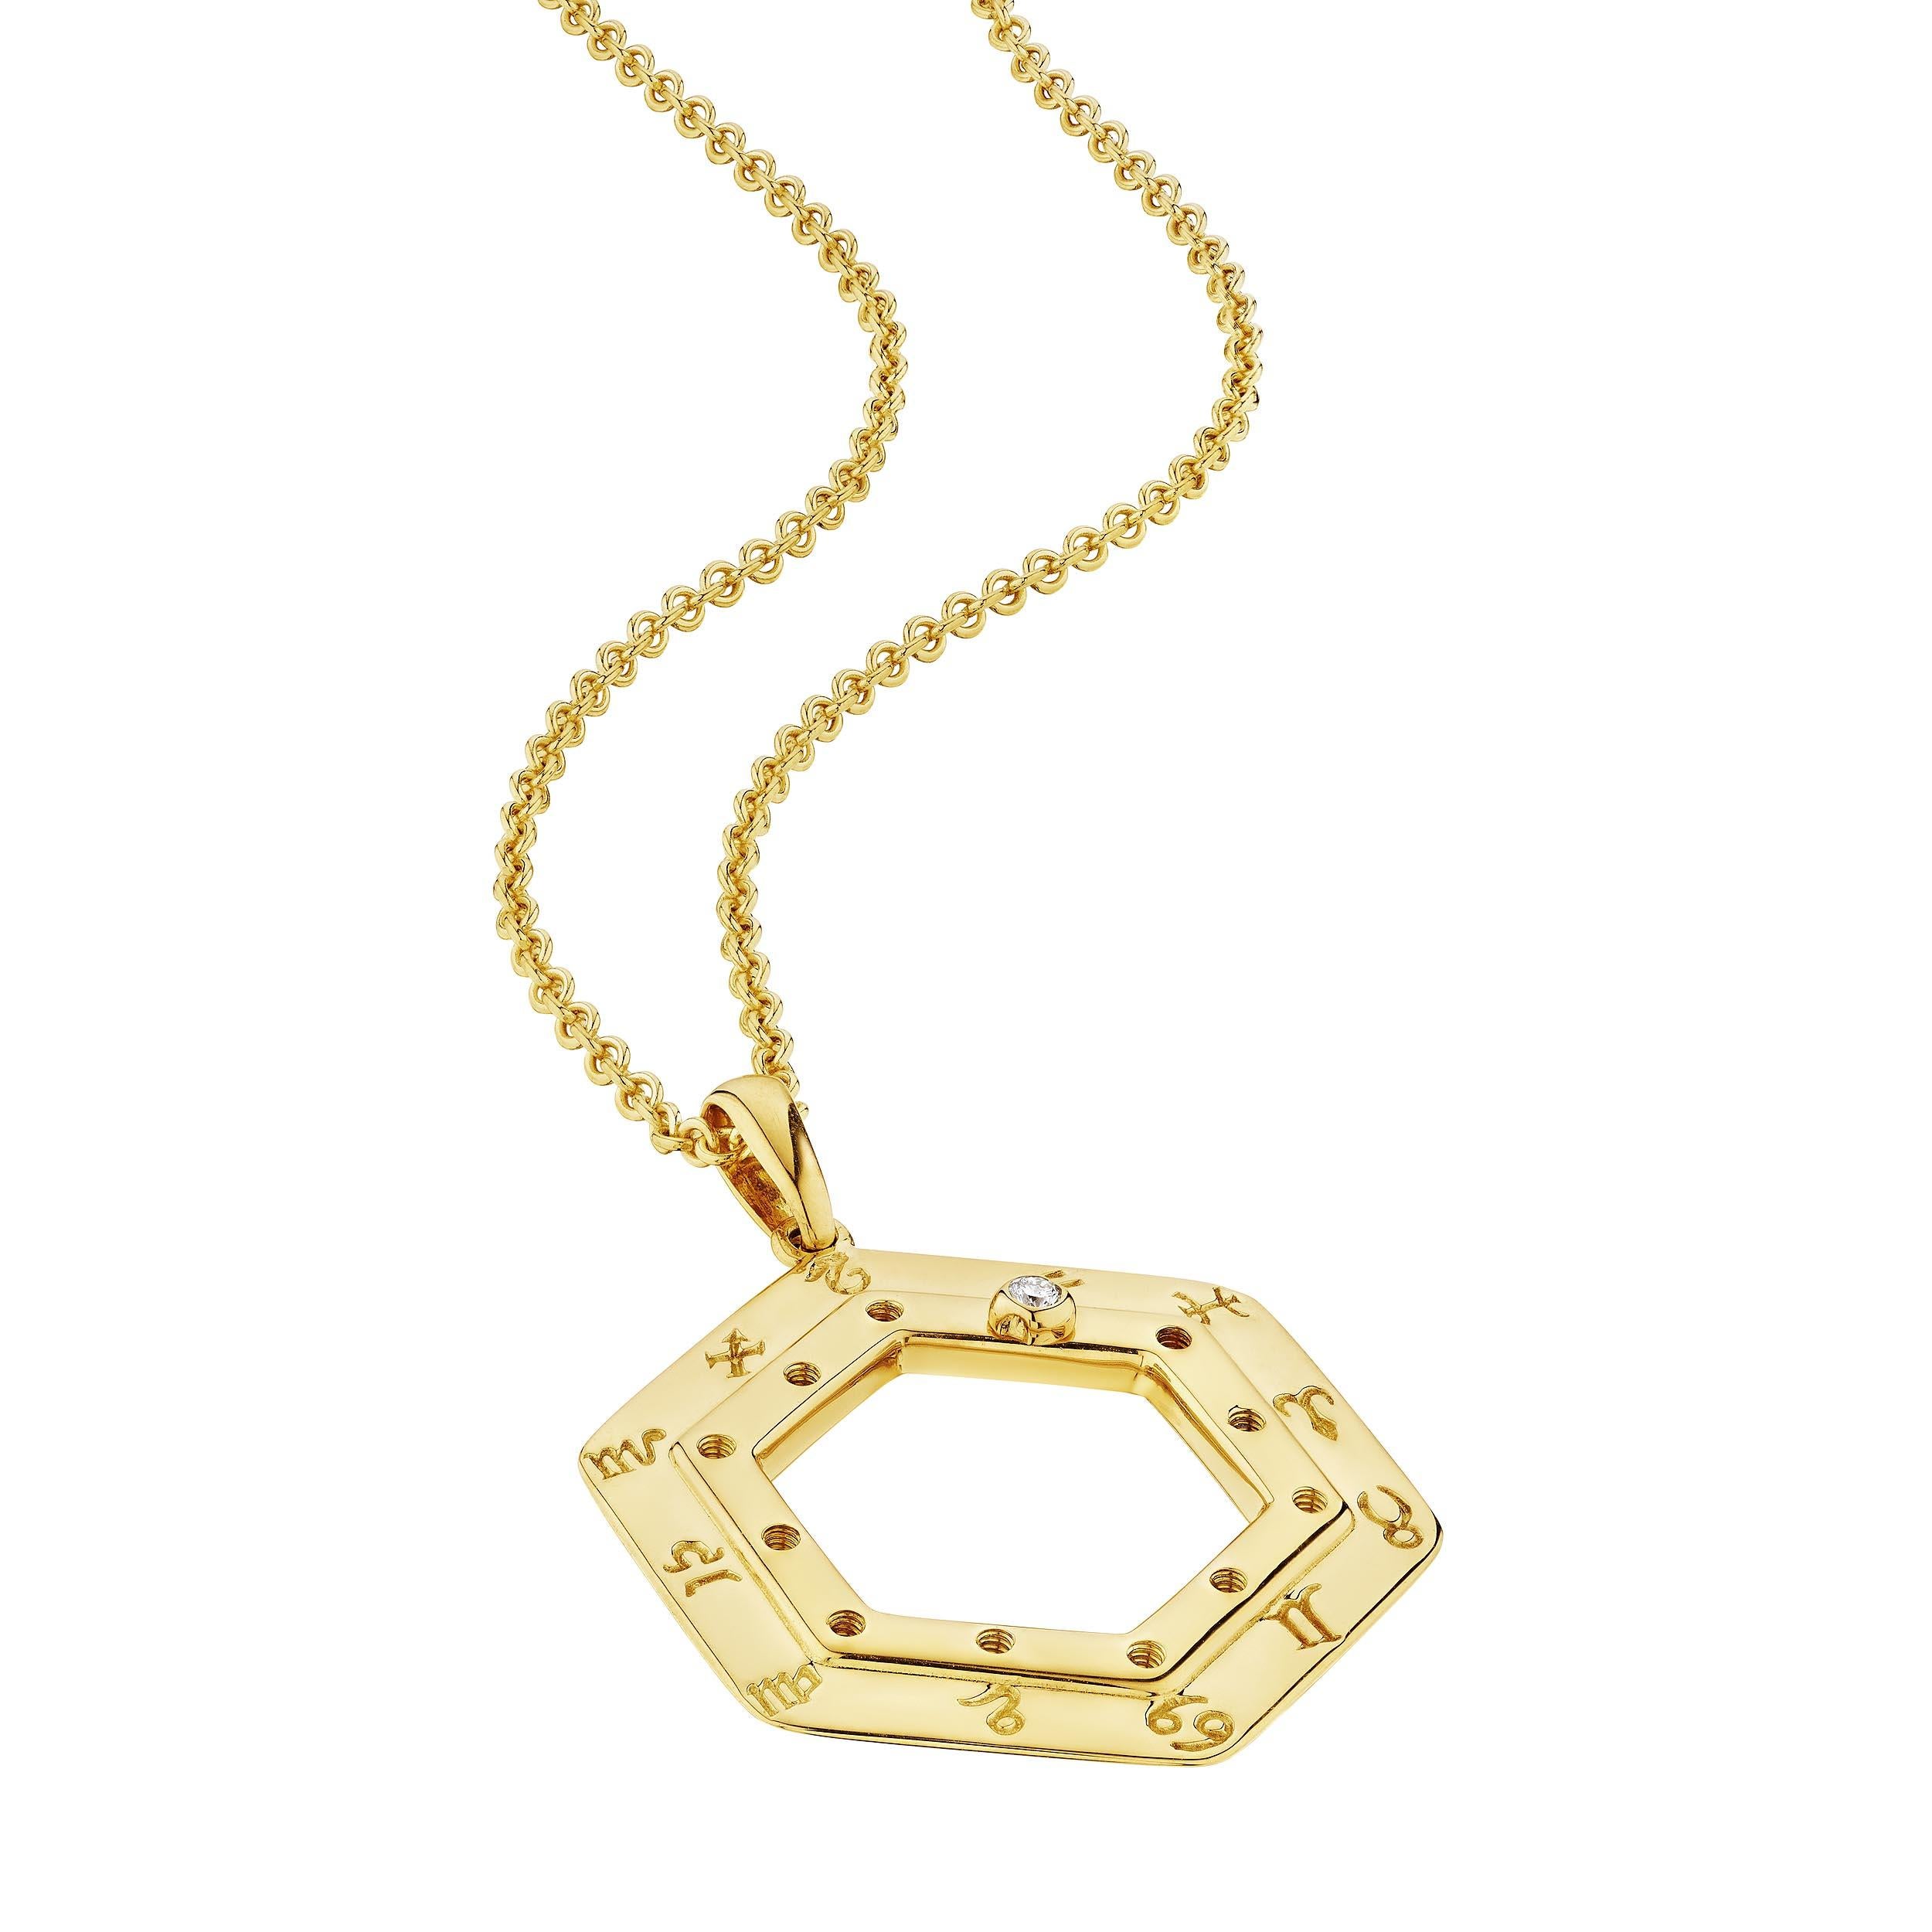 Cover all your bases with this Cartier vintage zodiac 18 karat yellow gold pendant charm representing all of the 12 zodiac signs.  Just move the bezel set round cut diamond marker to your zodiac symbol and this rare hexagon shape charm will